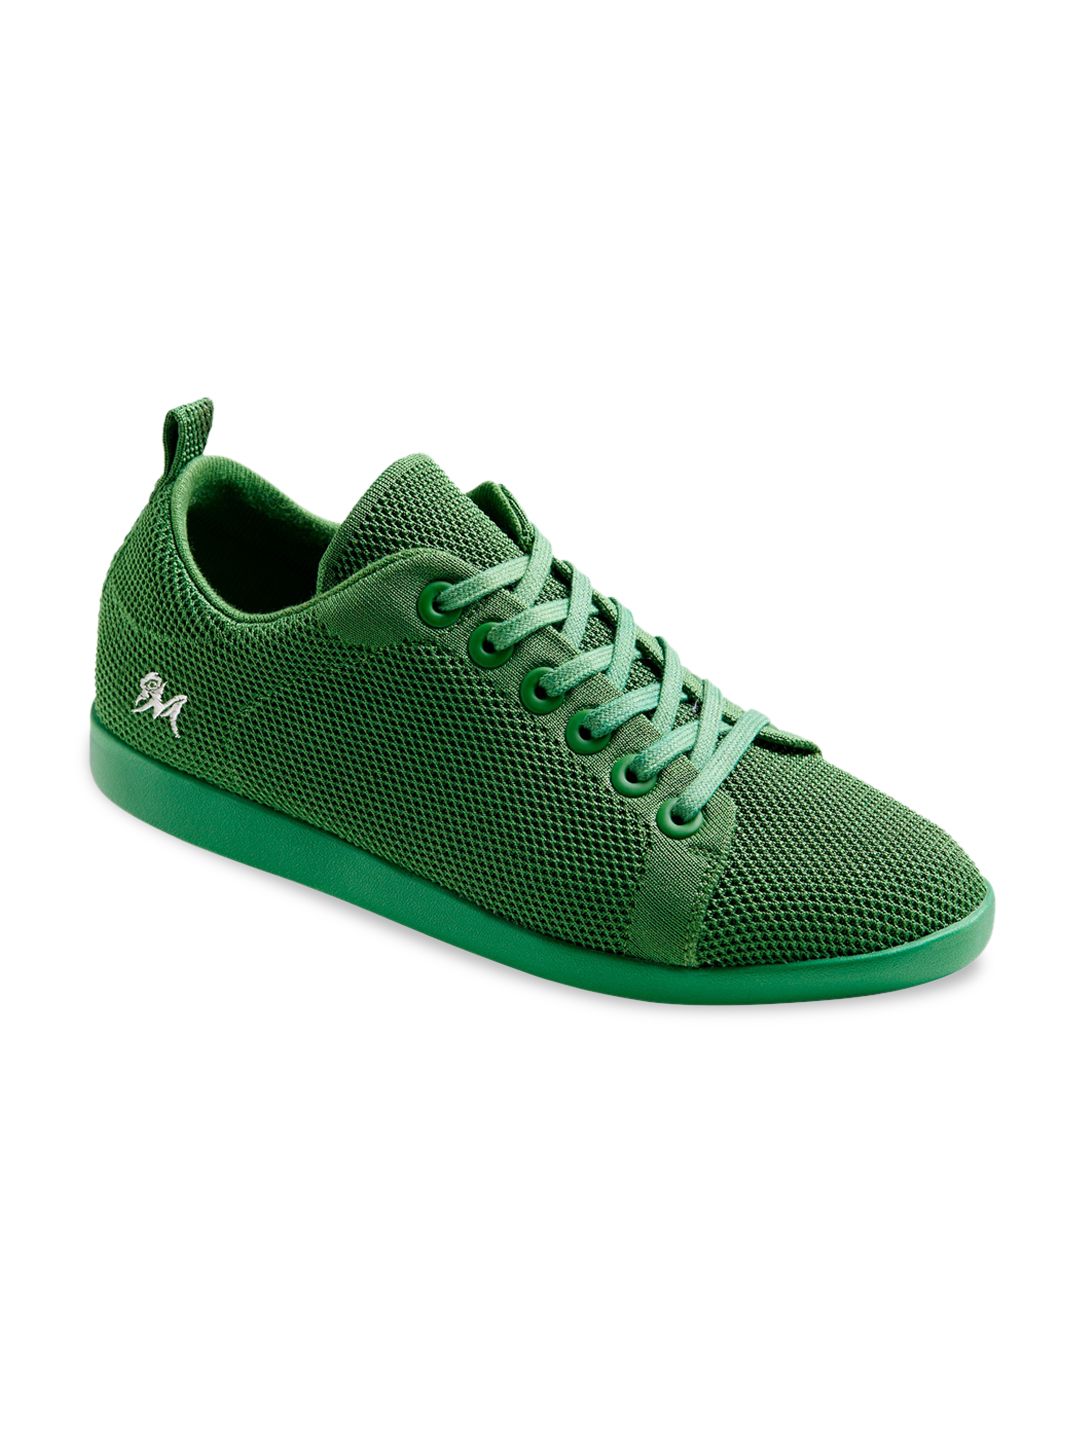 NEEMANS Unisex Green Textured Driving Shoes Price in India